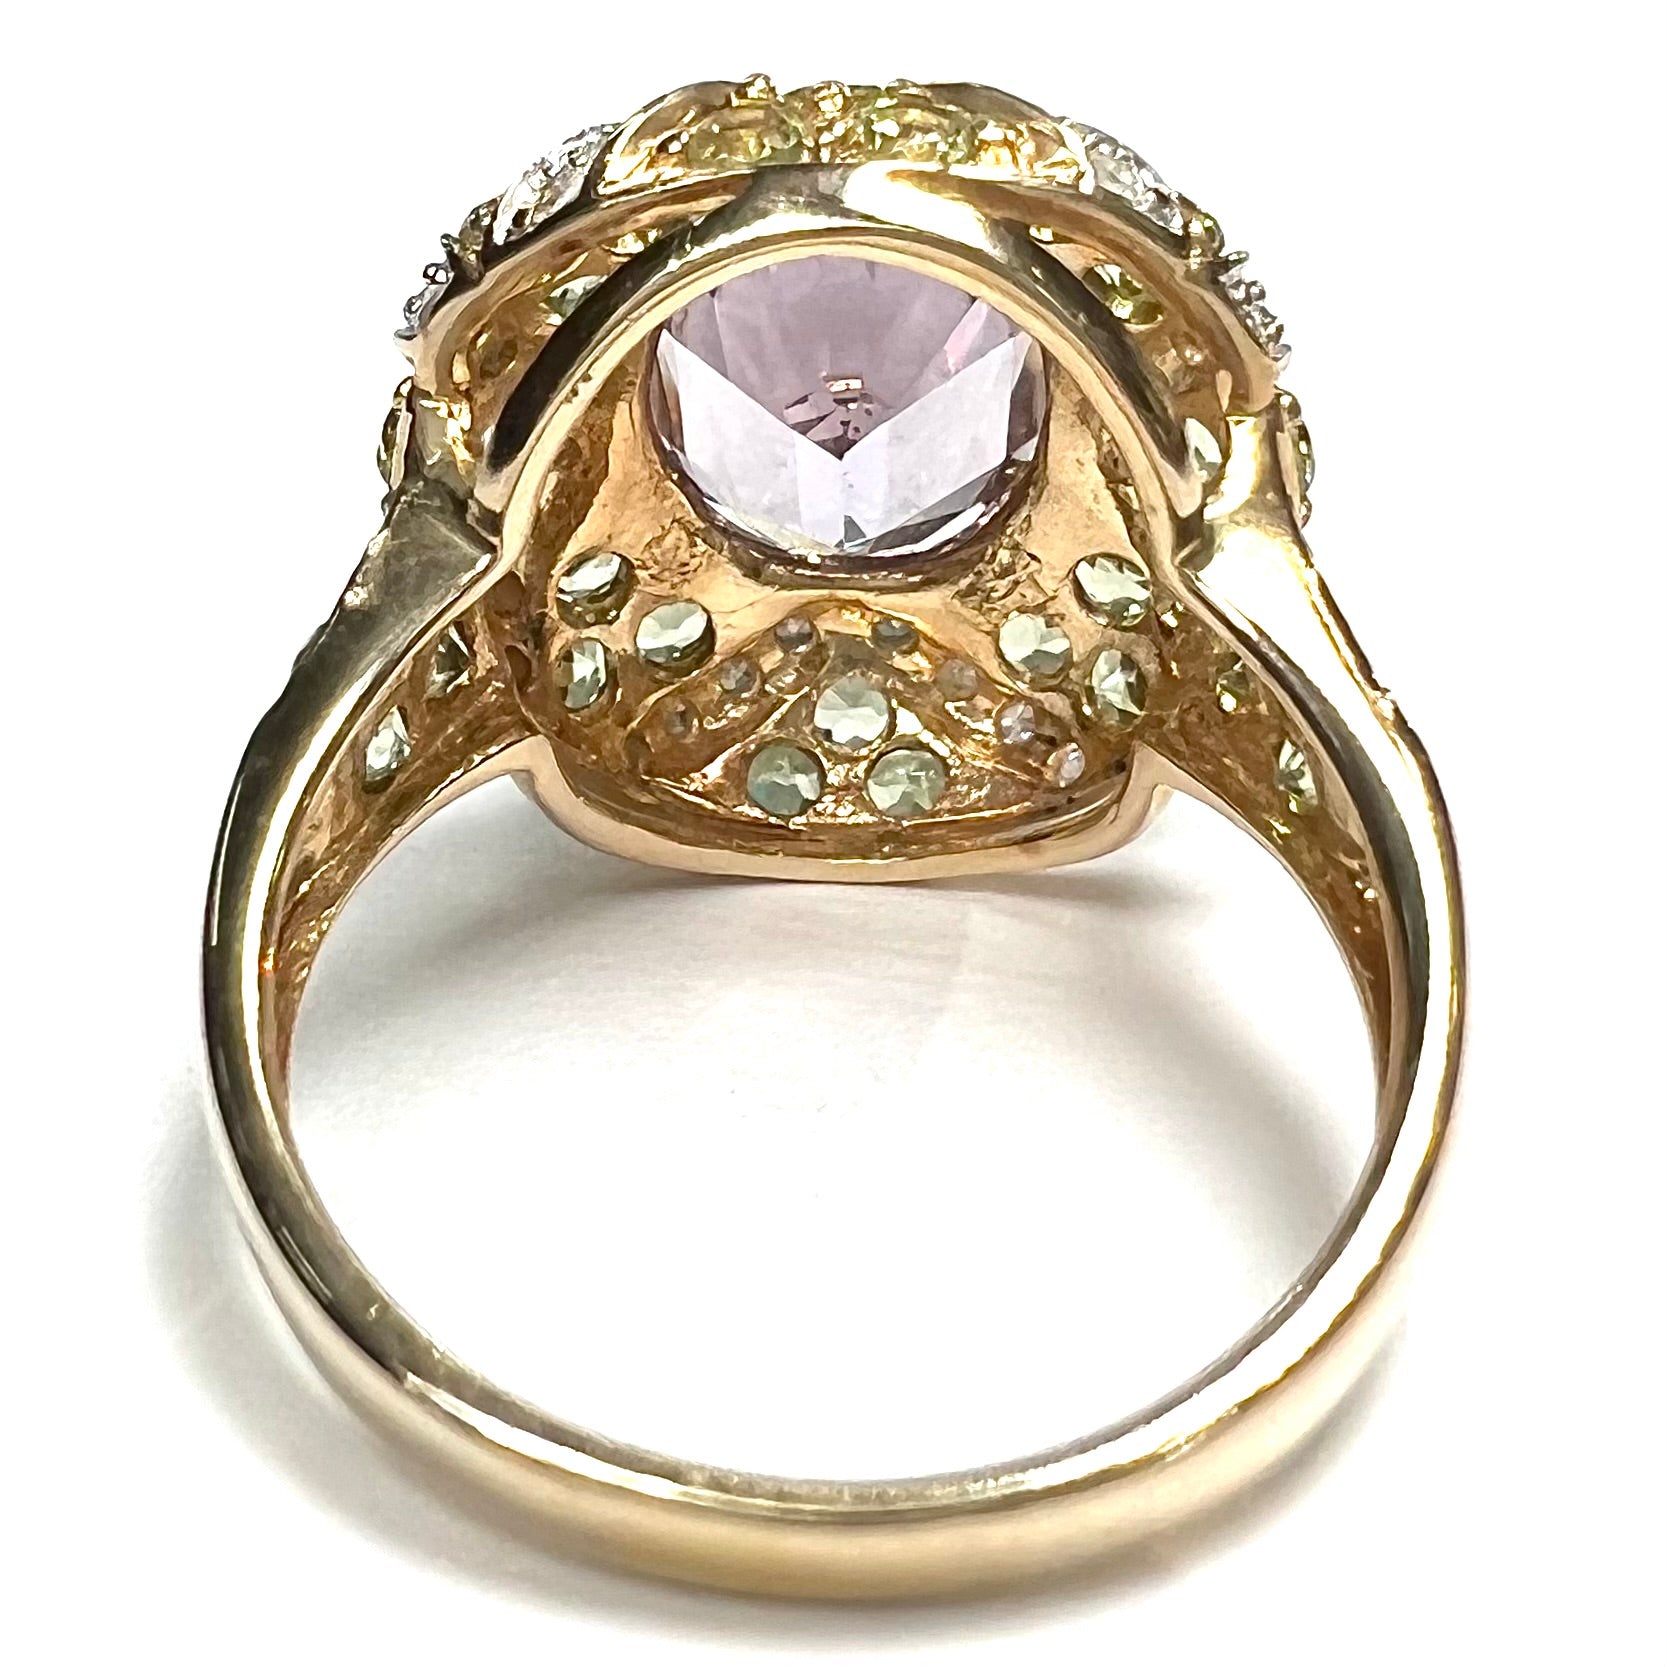 A ladies' yellow gold ring set with an oval cut lavender spinel center stone and diamond and peridot accent stones.